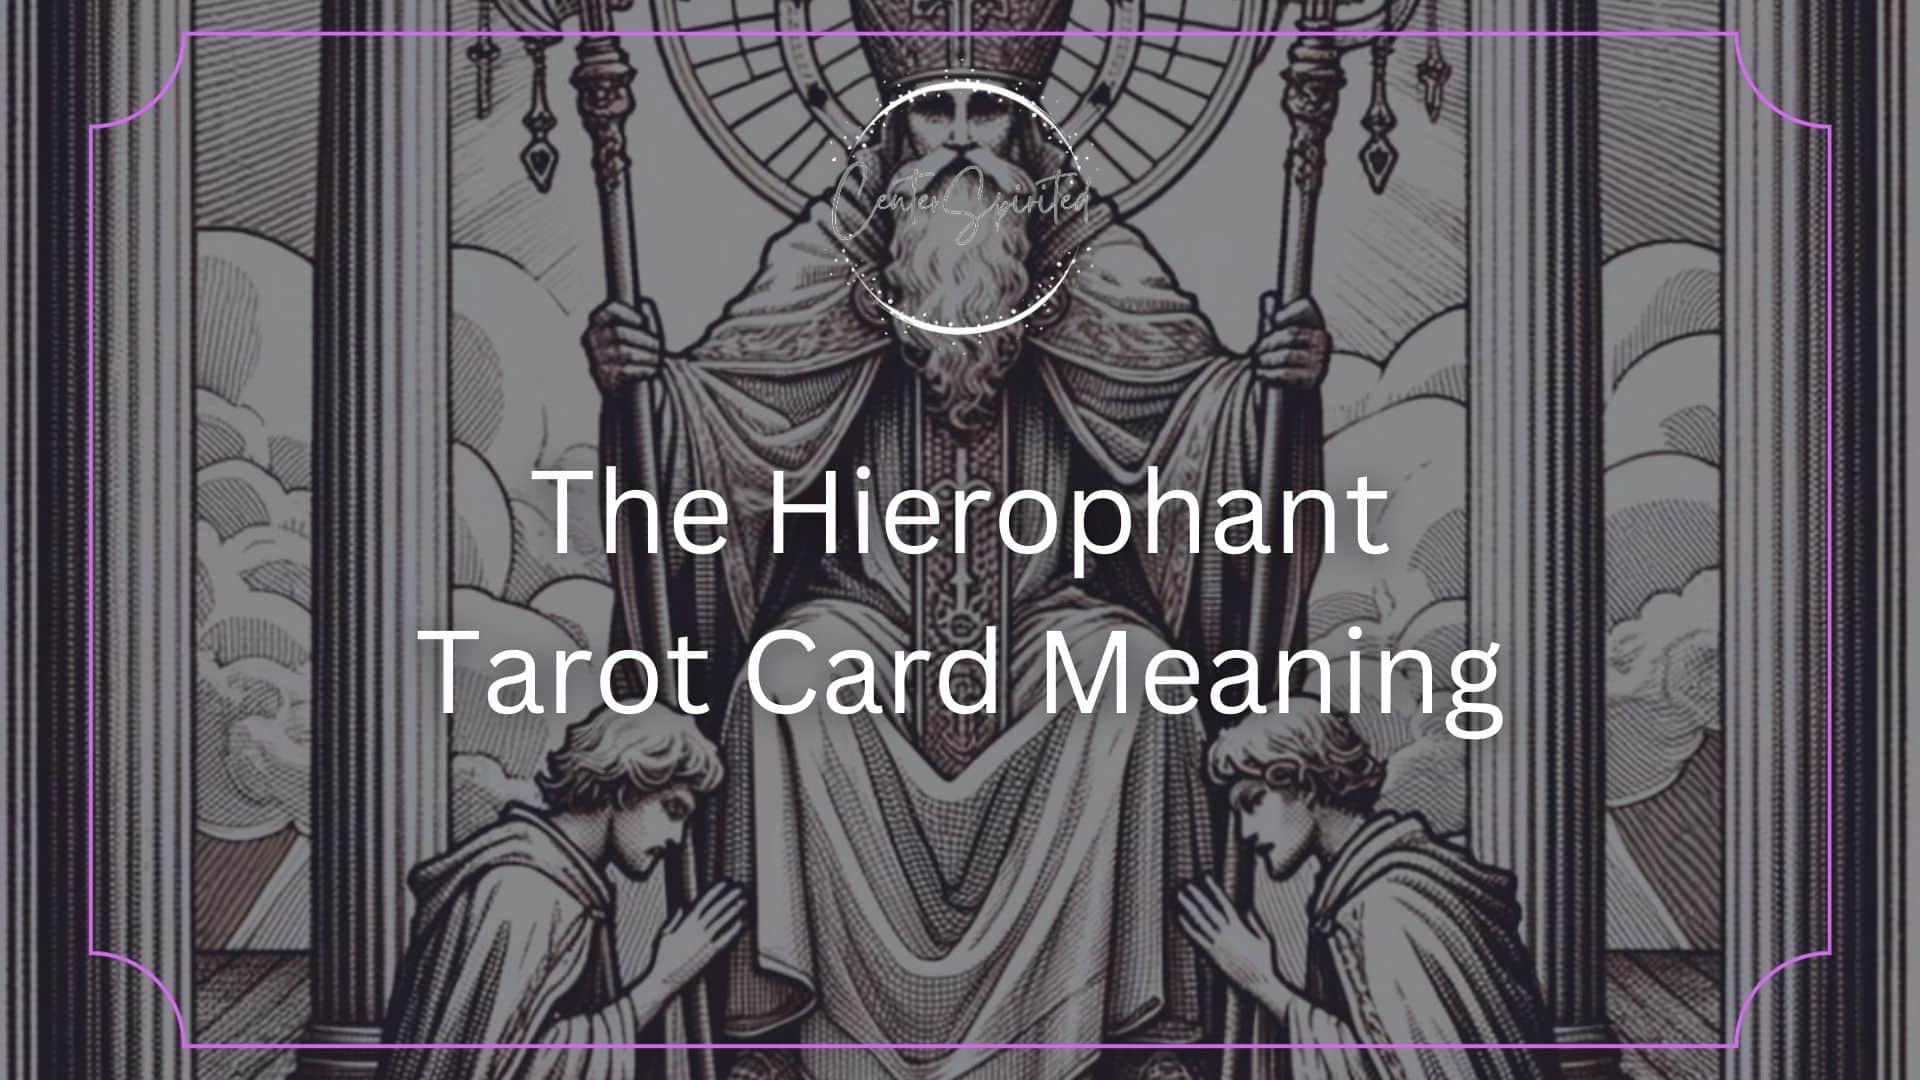 Hierophant - Hierophant added a new photo.